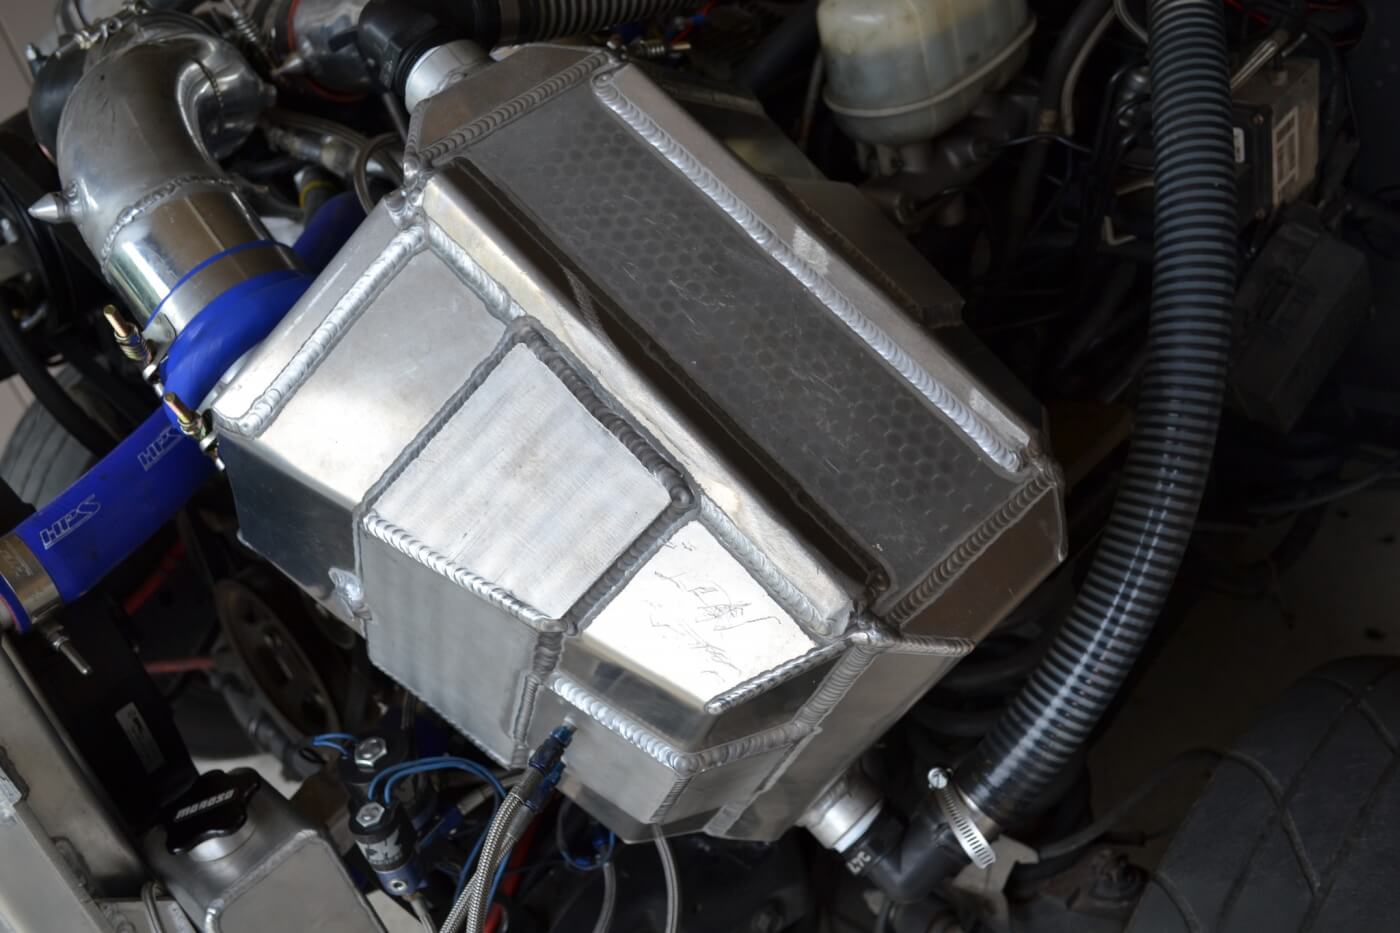 With the front clip removed, one of the more impressive engine pieces is the mammoth water-to-air intercooler. Built by Chiseled Performance, this intercooler is rated to flow up to 3,000 hp worth of air.